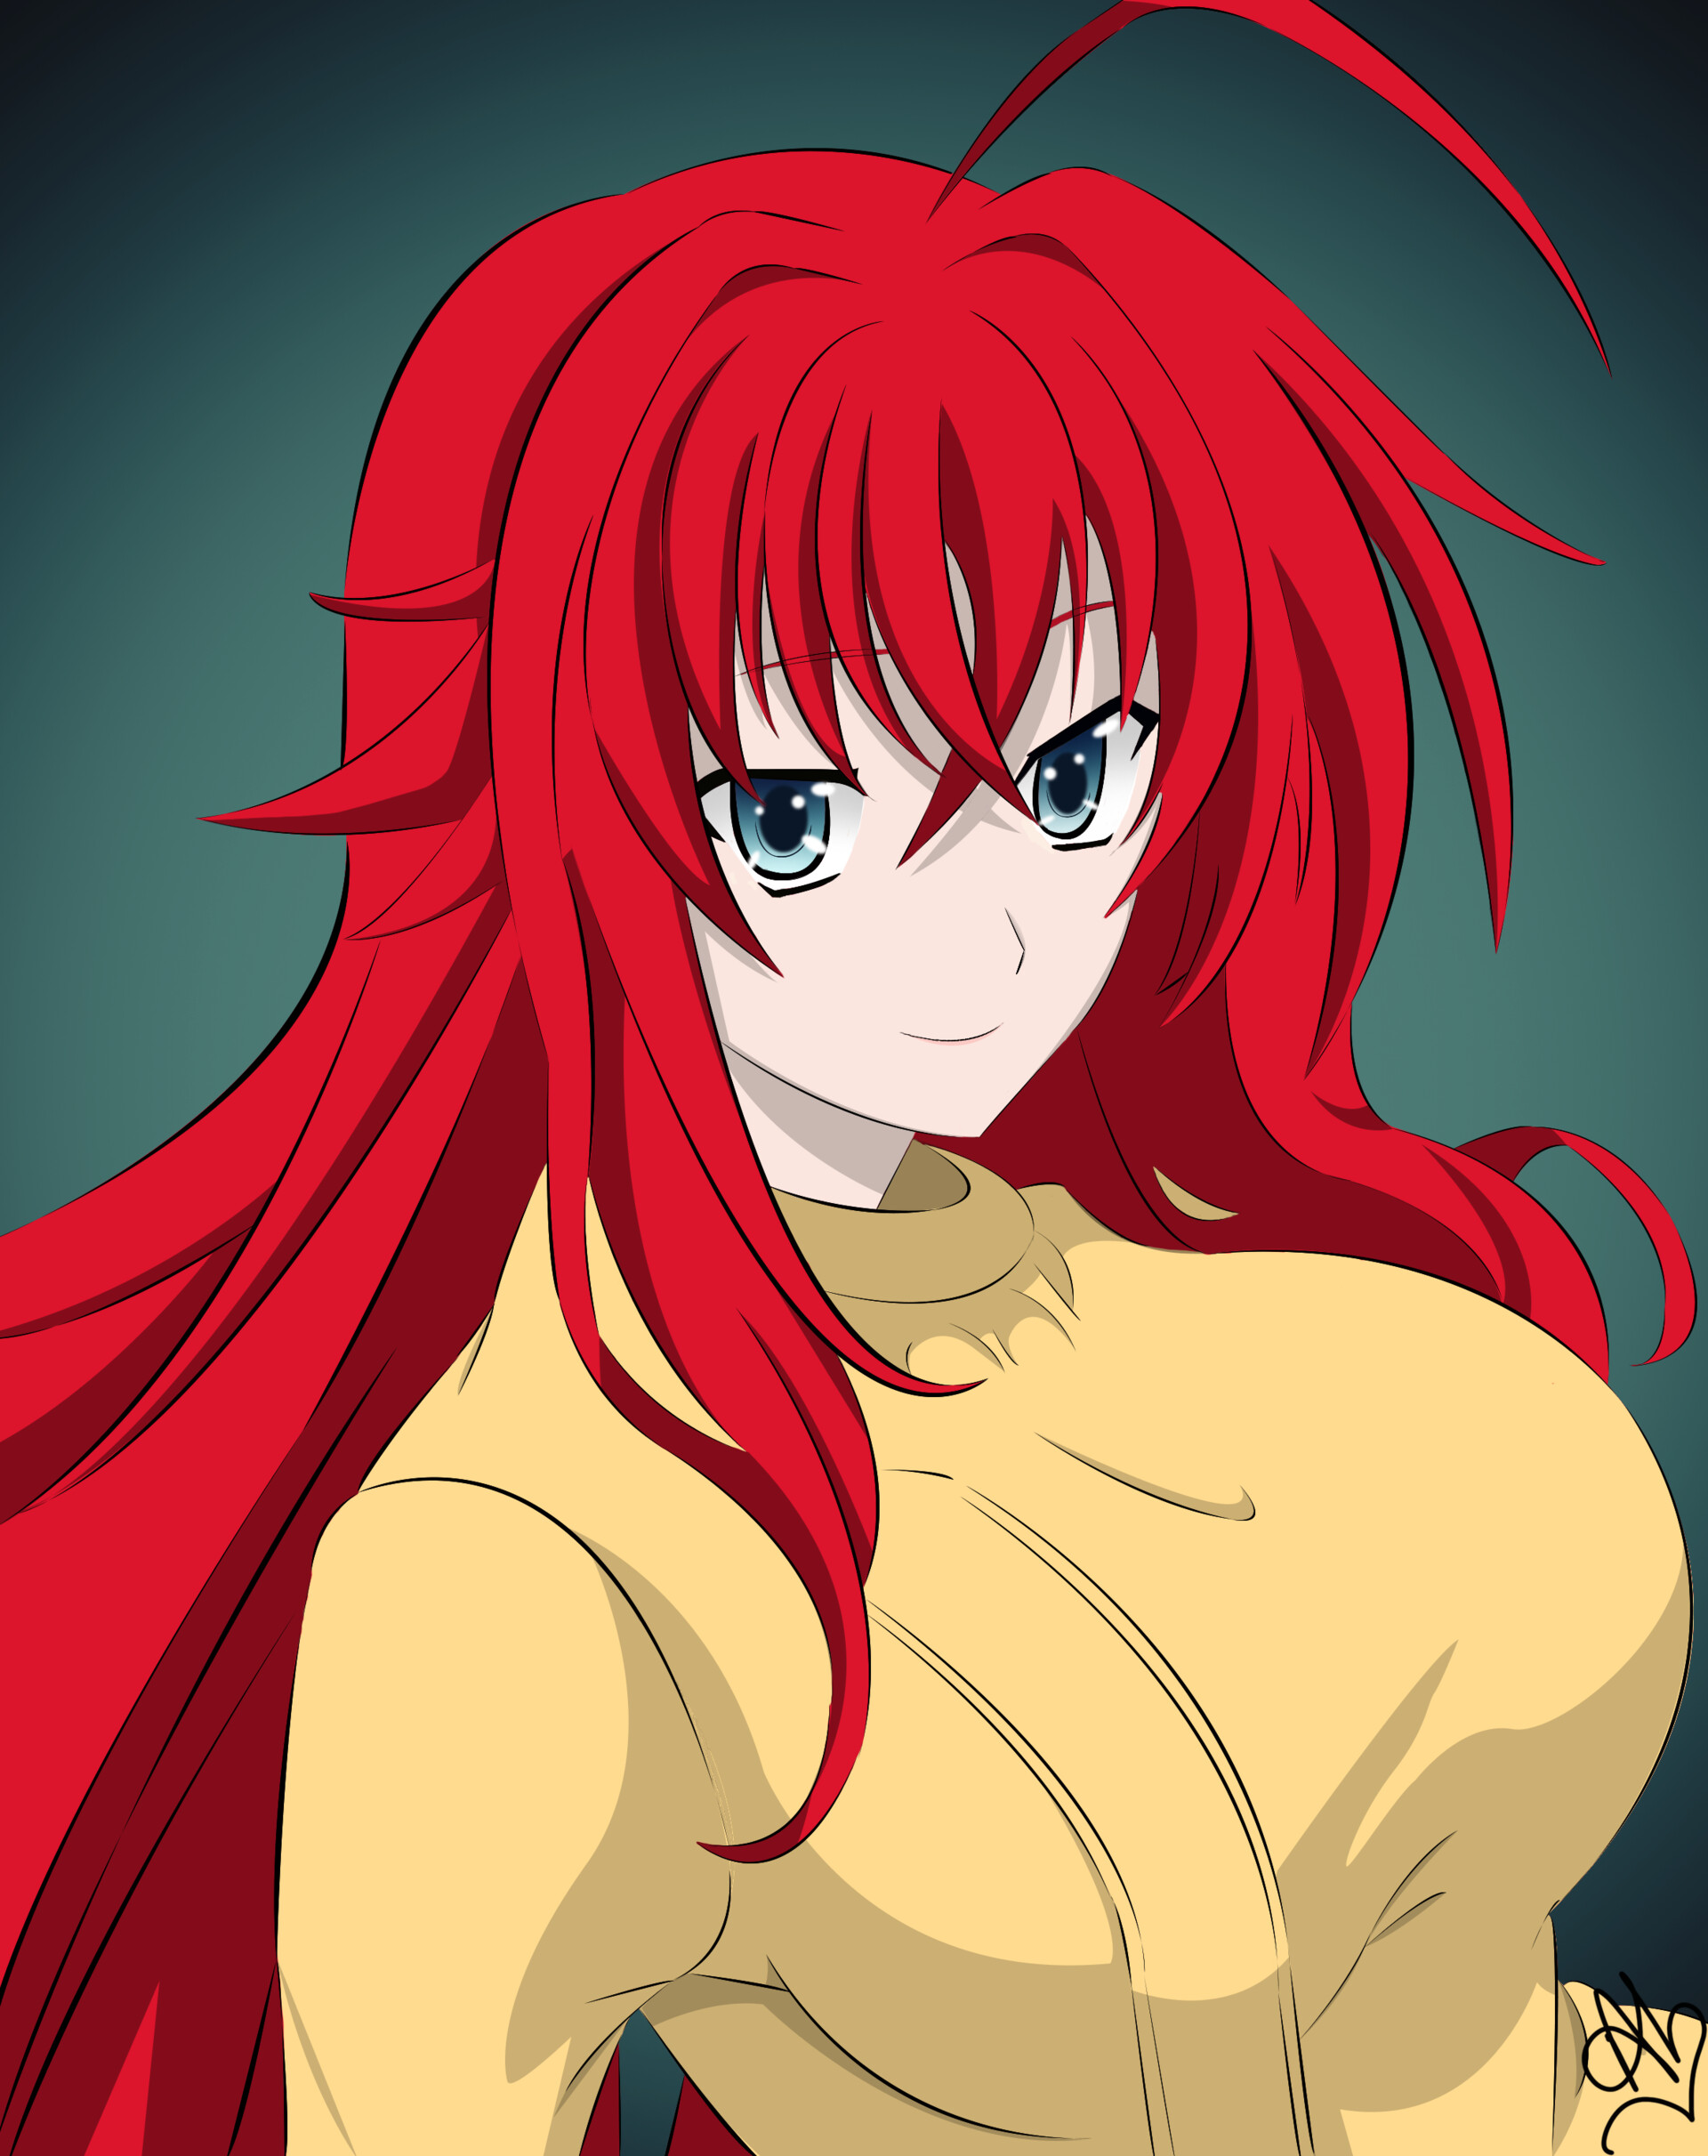 Wallpaper Anime - Anime: High School Dxd Character: Rias